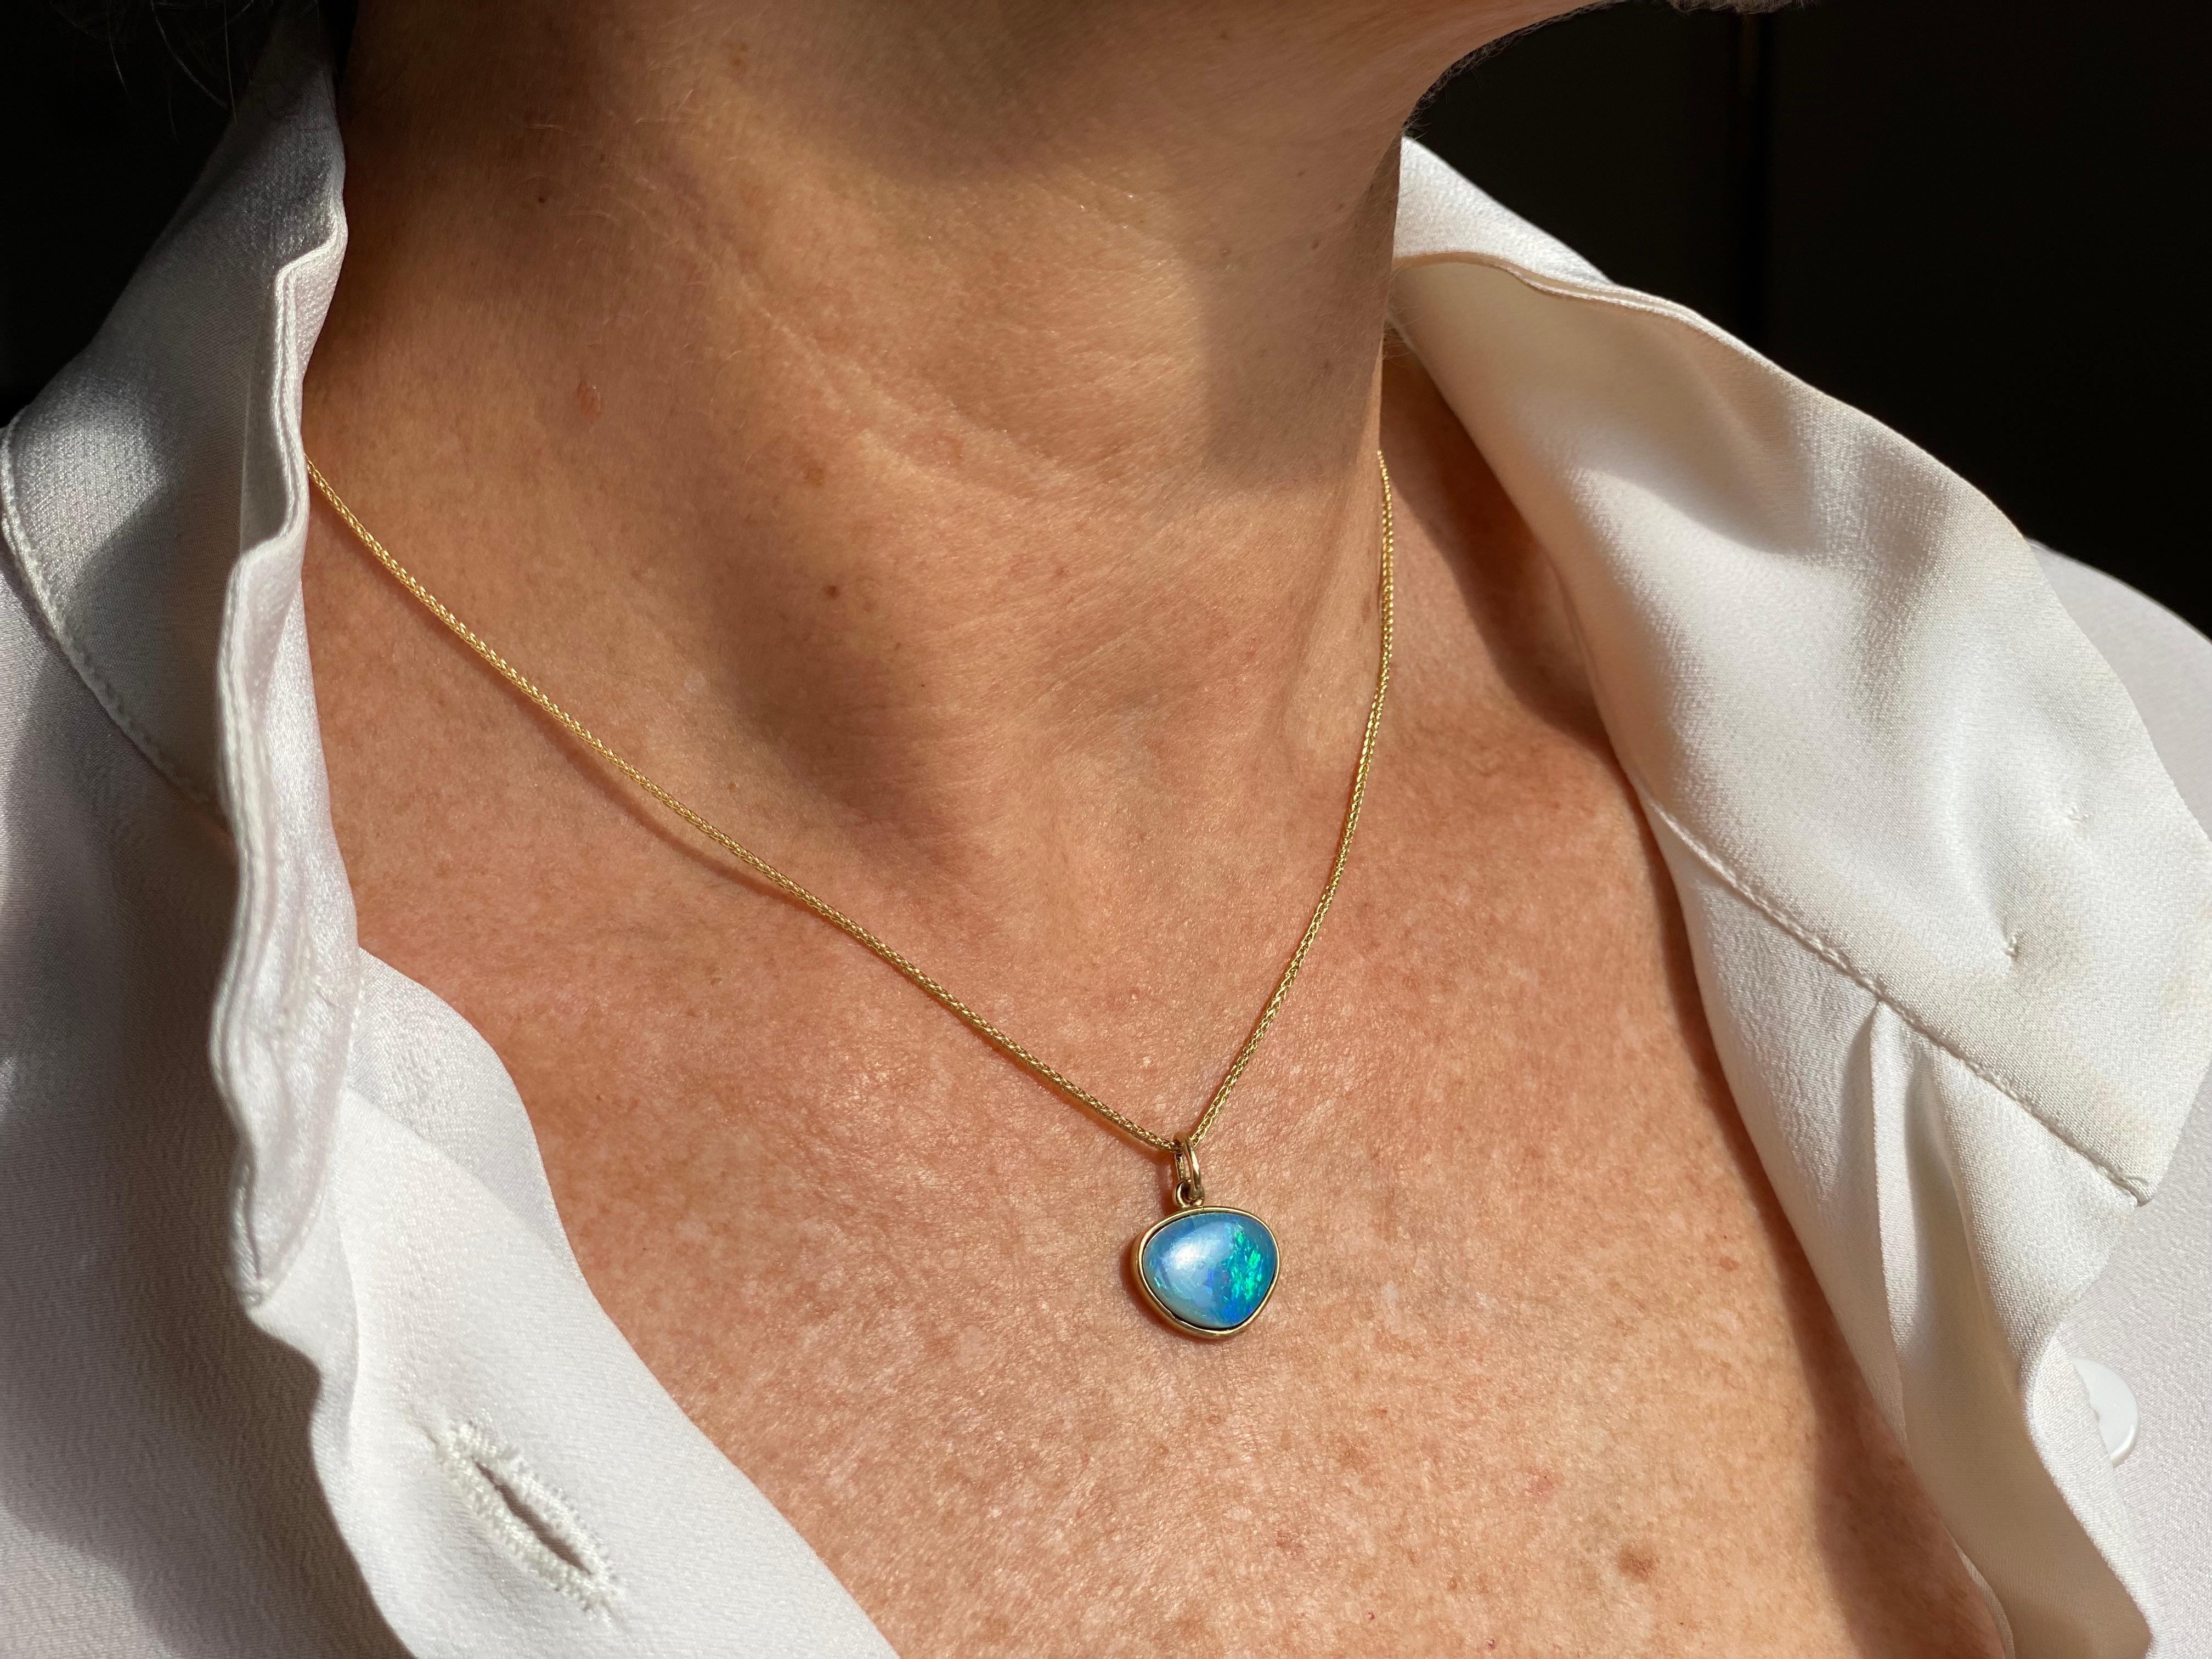 Introducing the mesmerizing Rossella Ugolini Opal Collection, where simplicity meets luminosity. This necklace, handcrafted in Italy with meticulous attention to detail, features an 18K yellow gold chain meticulously crafted like an Ear of Wheat